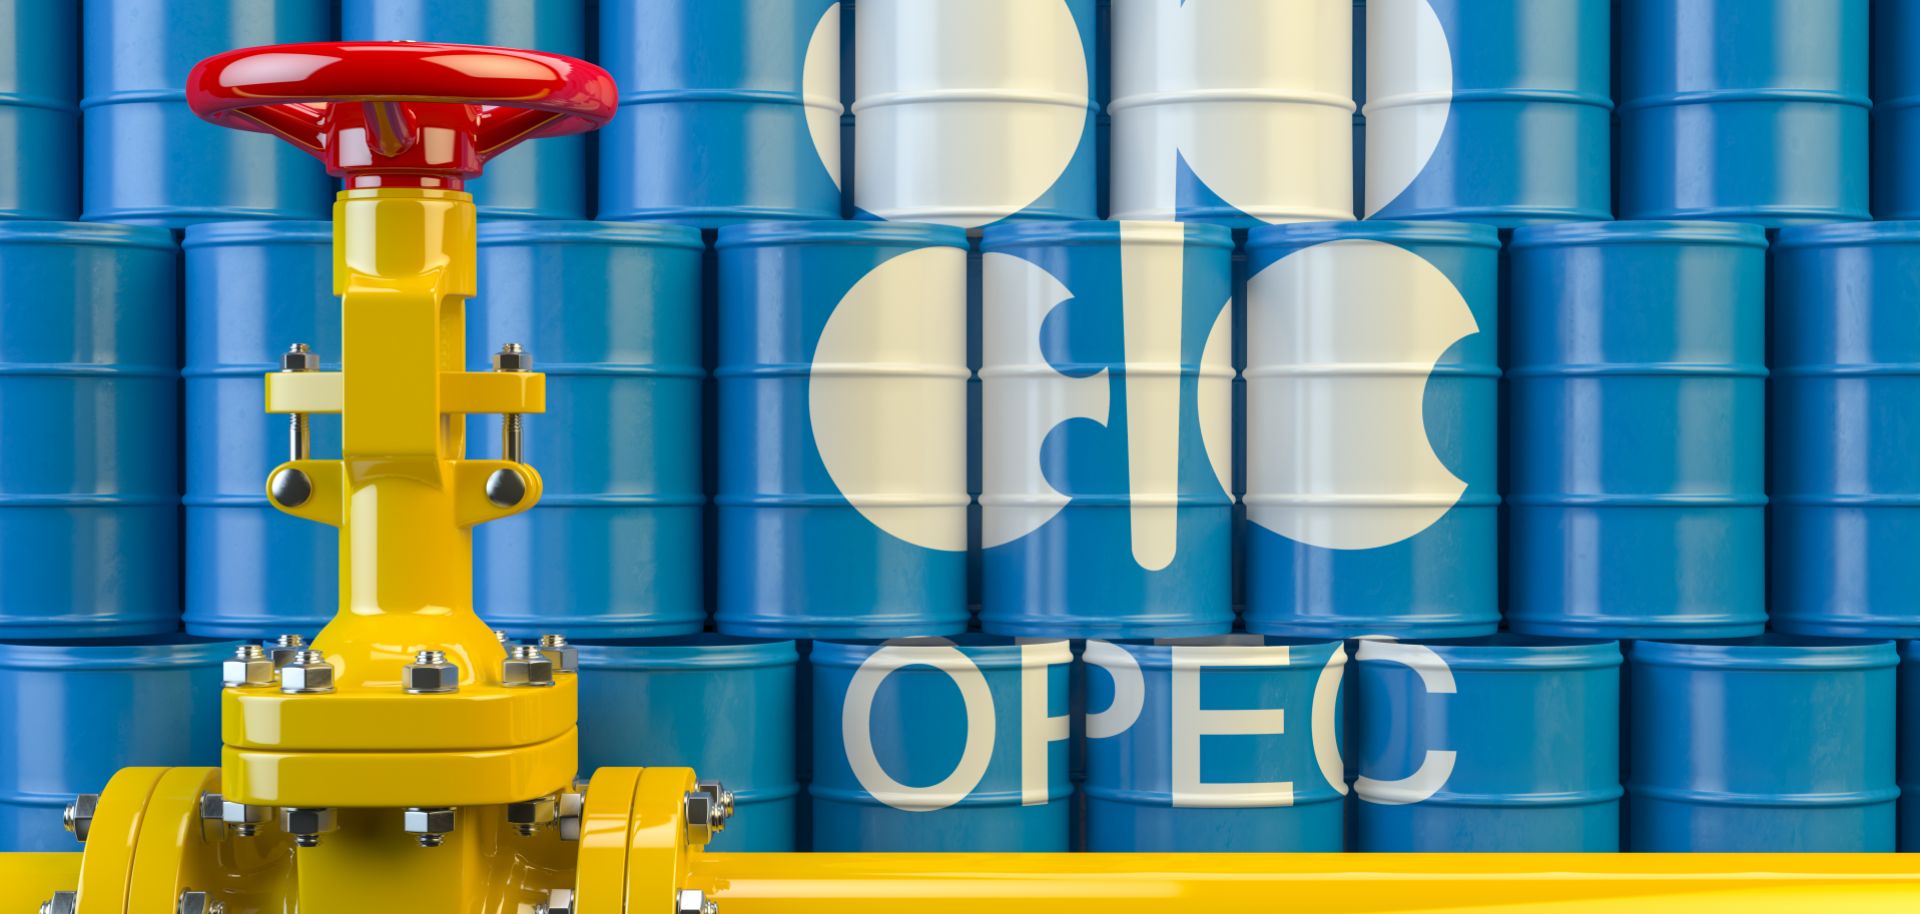 This illustration shows the OPEC logo and an oil pipeline.